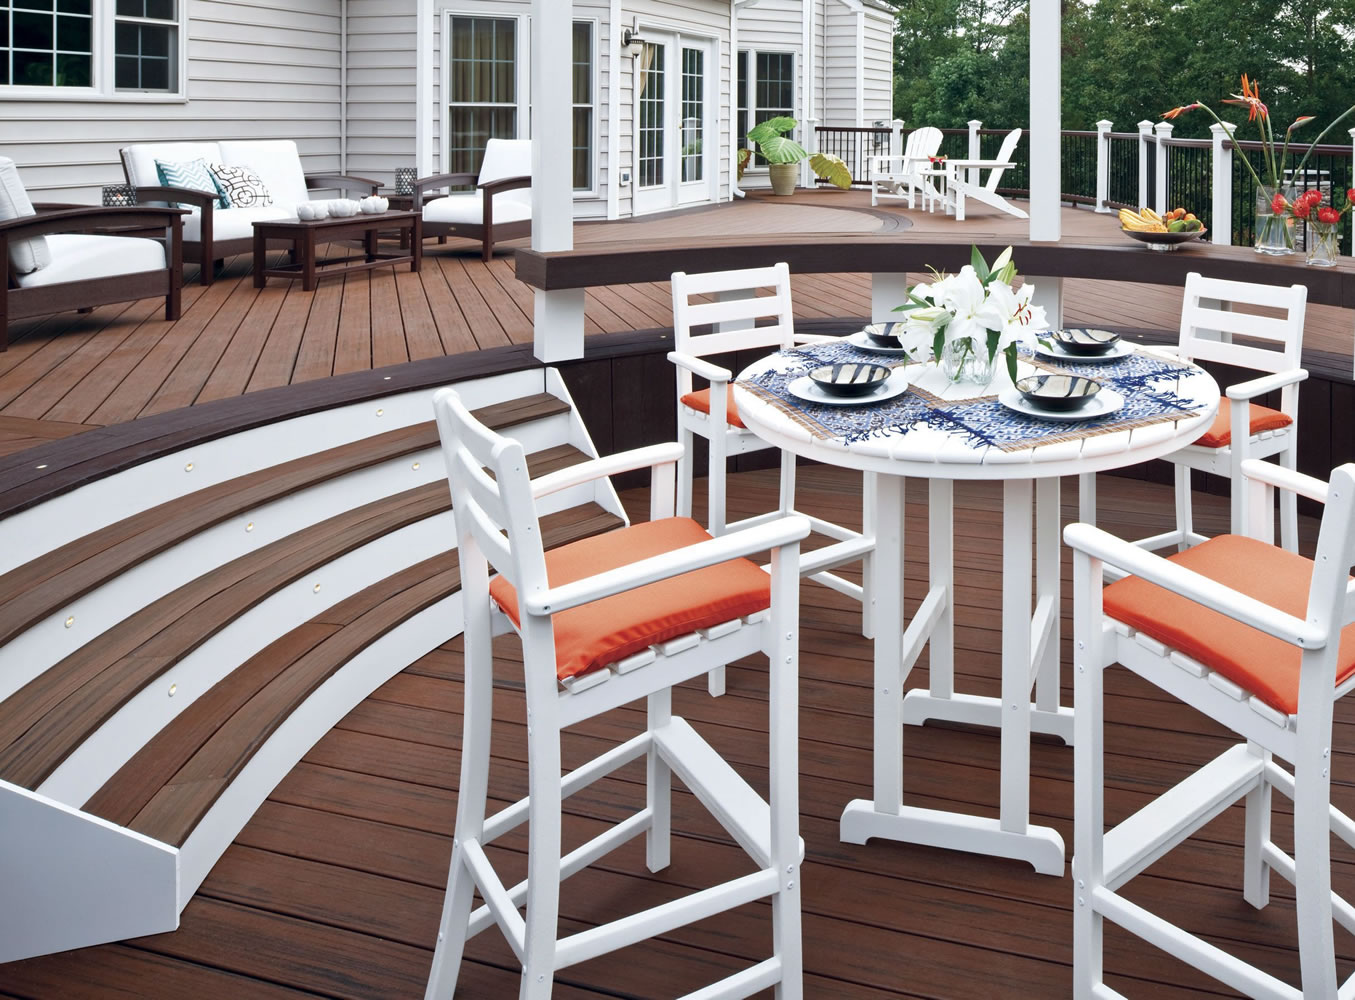 Wood decks are rapidly being replaced by plastic, aluminum and other man-made decking materials, which are prized for their easy maintenance.